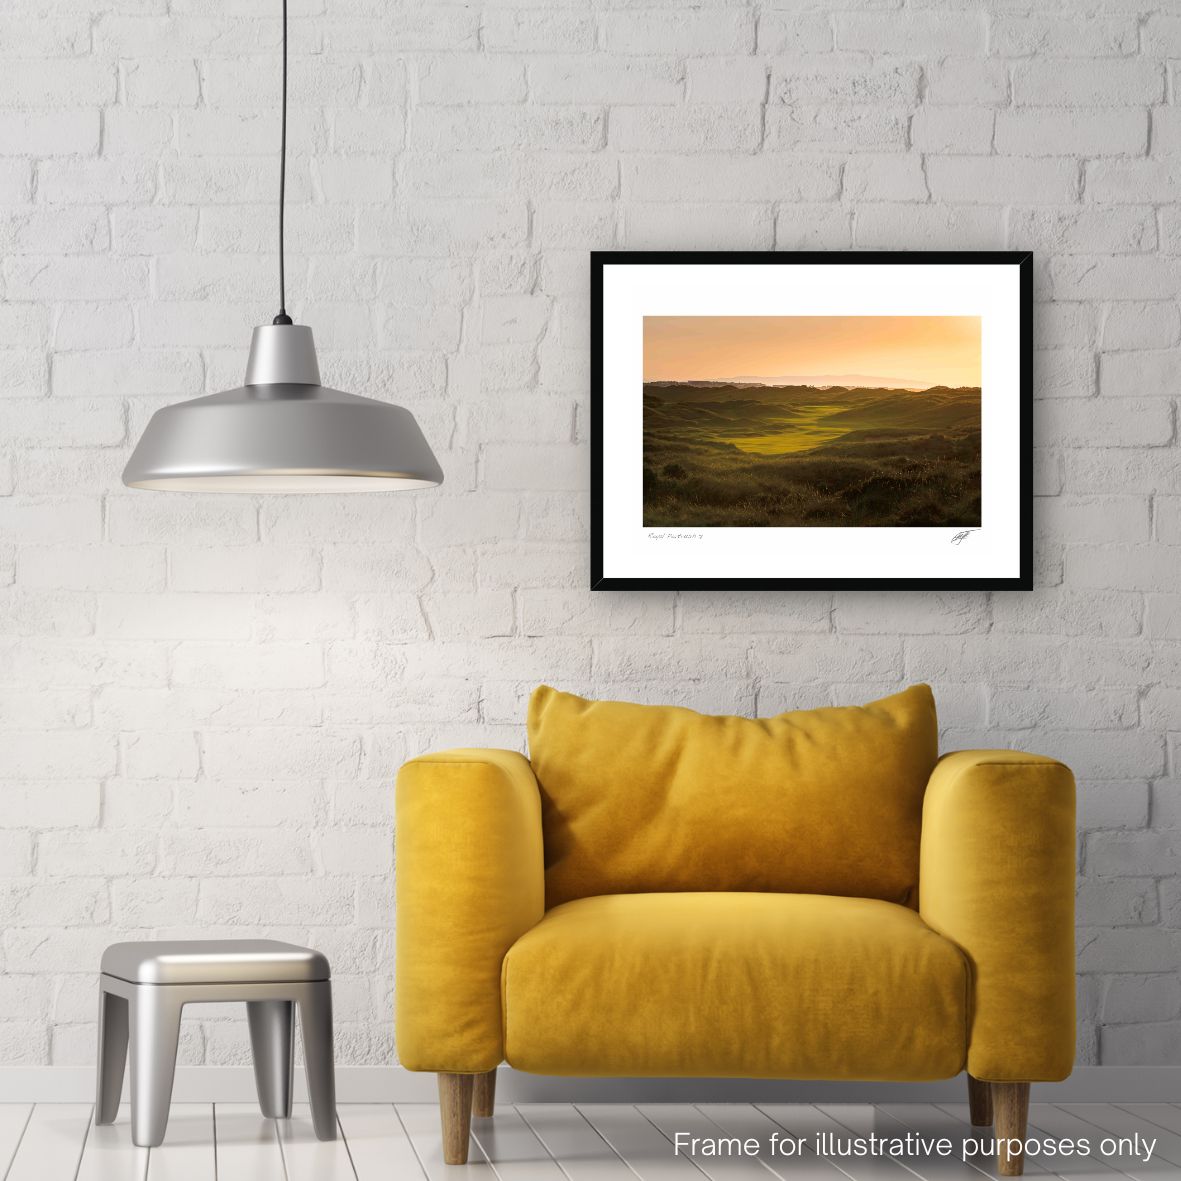 Royal Portrush Golf Club 7th Photography print by Adam Toth in contemporary black frame